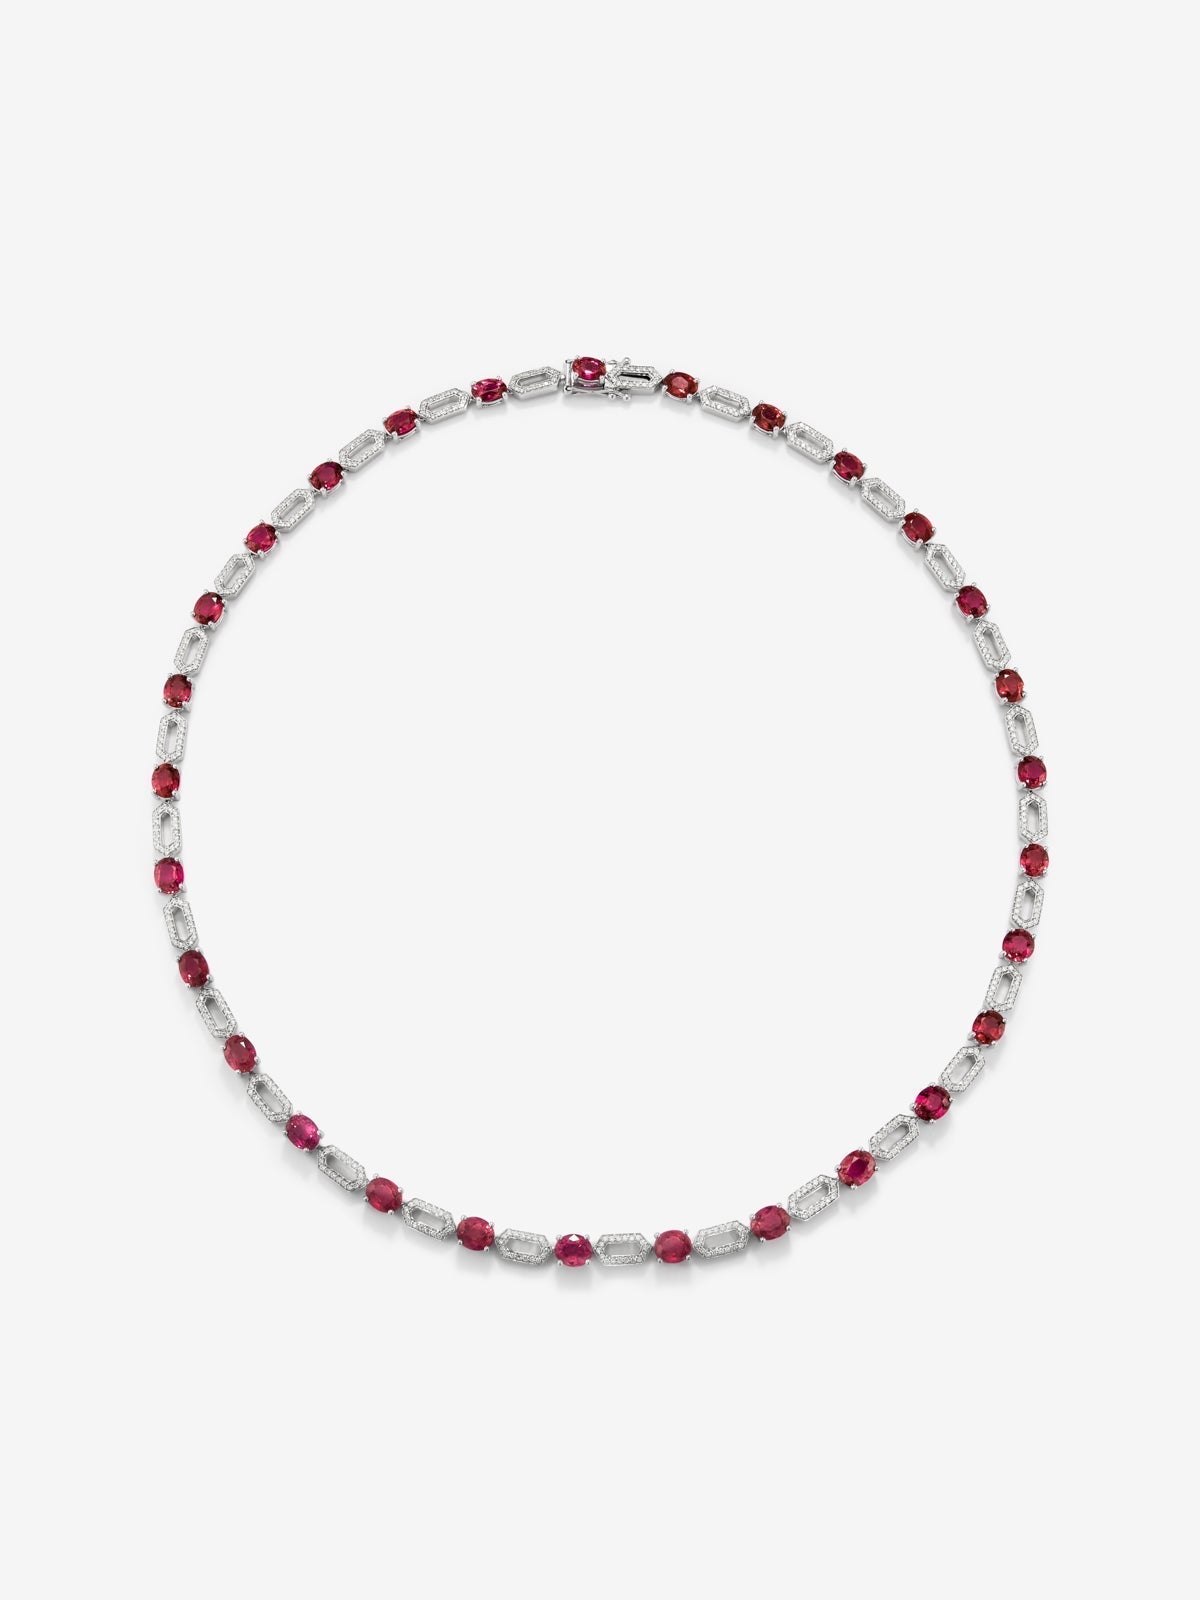 18K white gold necklace with 29 oval-cut red rubies with a total of 18.04 cts and 522 brilliant-cut diamonds with a total of 1.31 cts